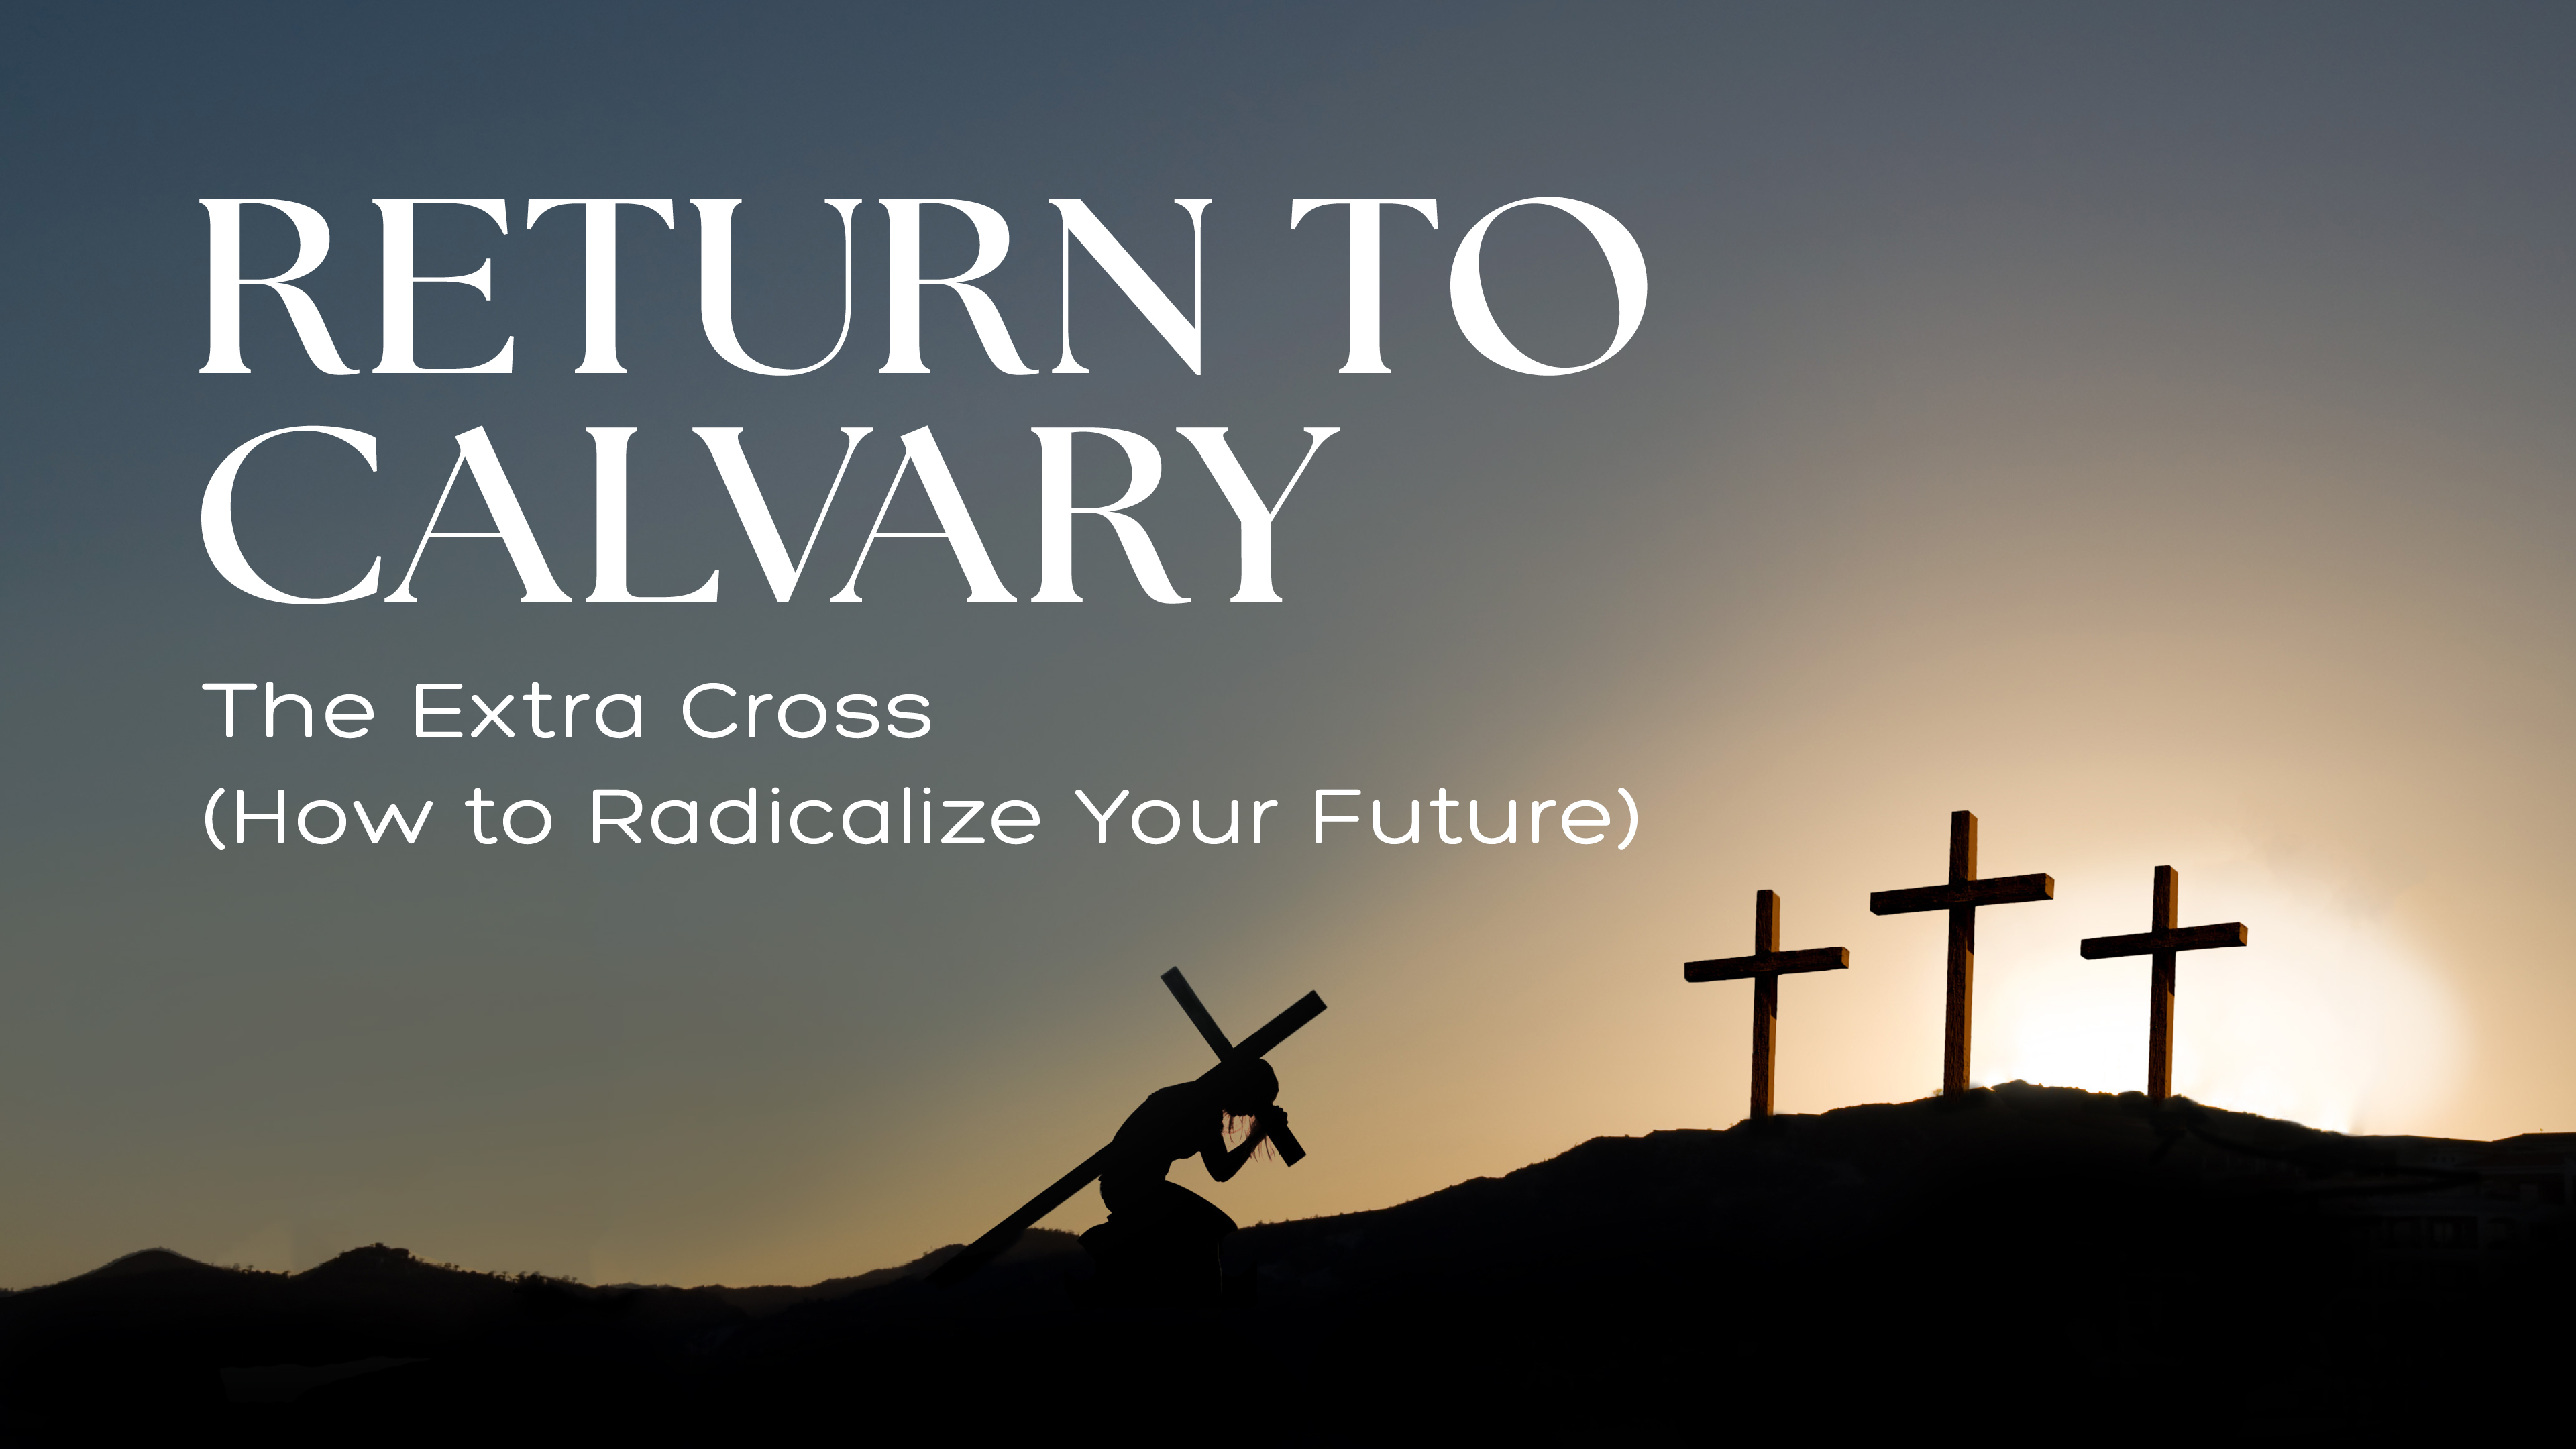 The Extra Cross (How to Radicalize Your Future)